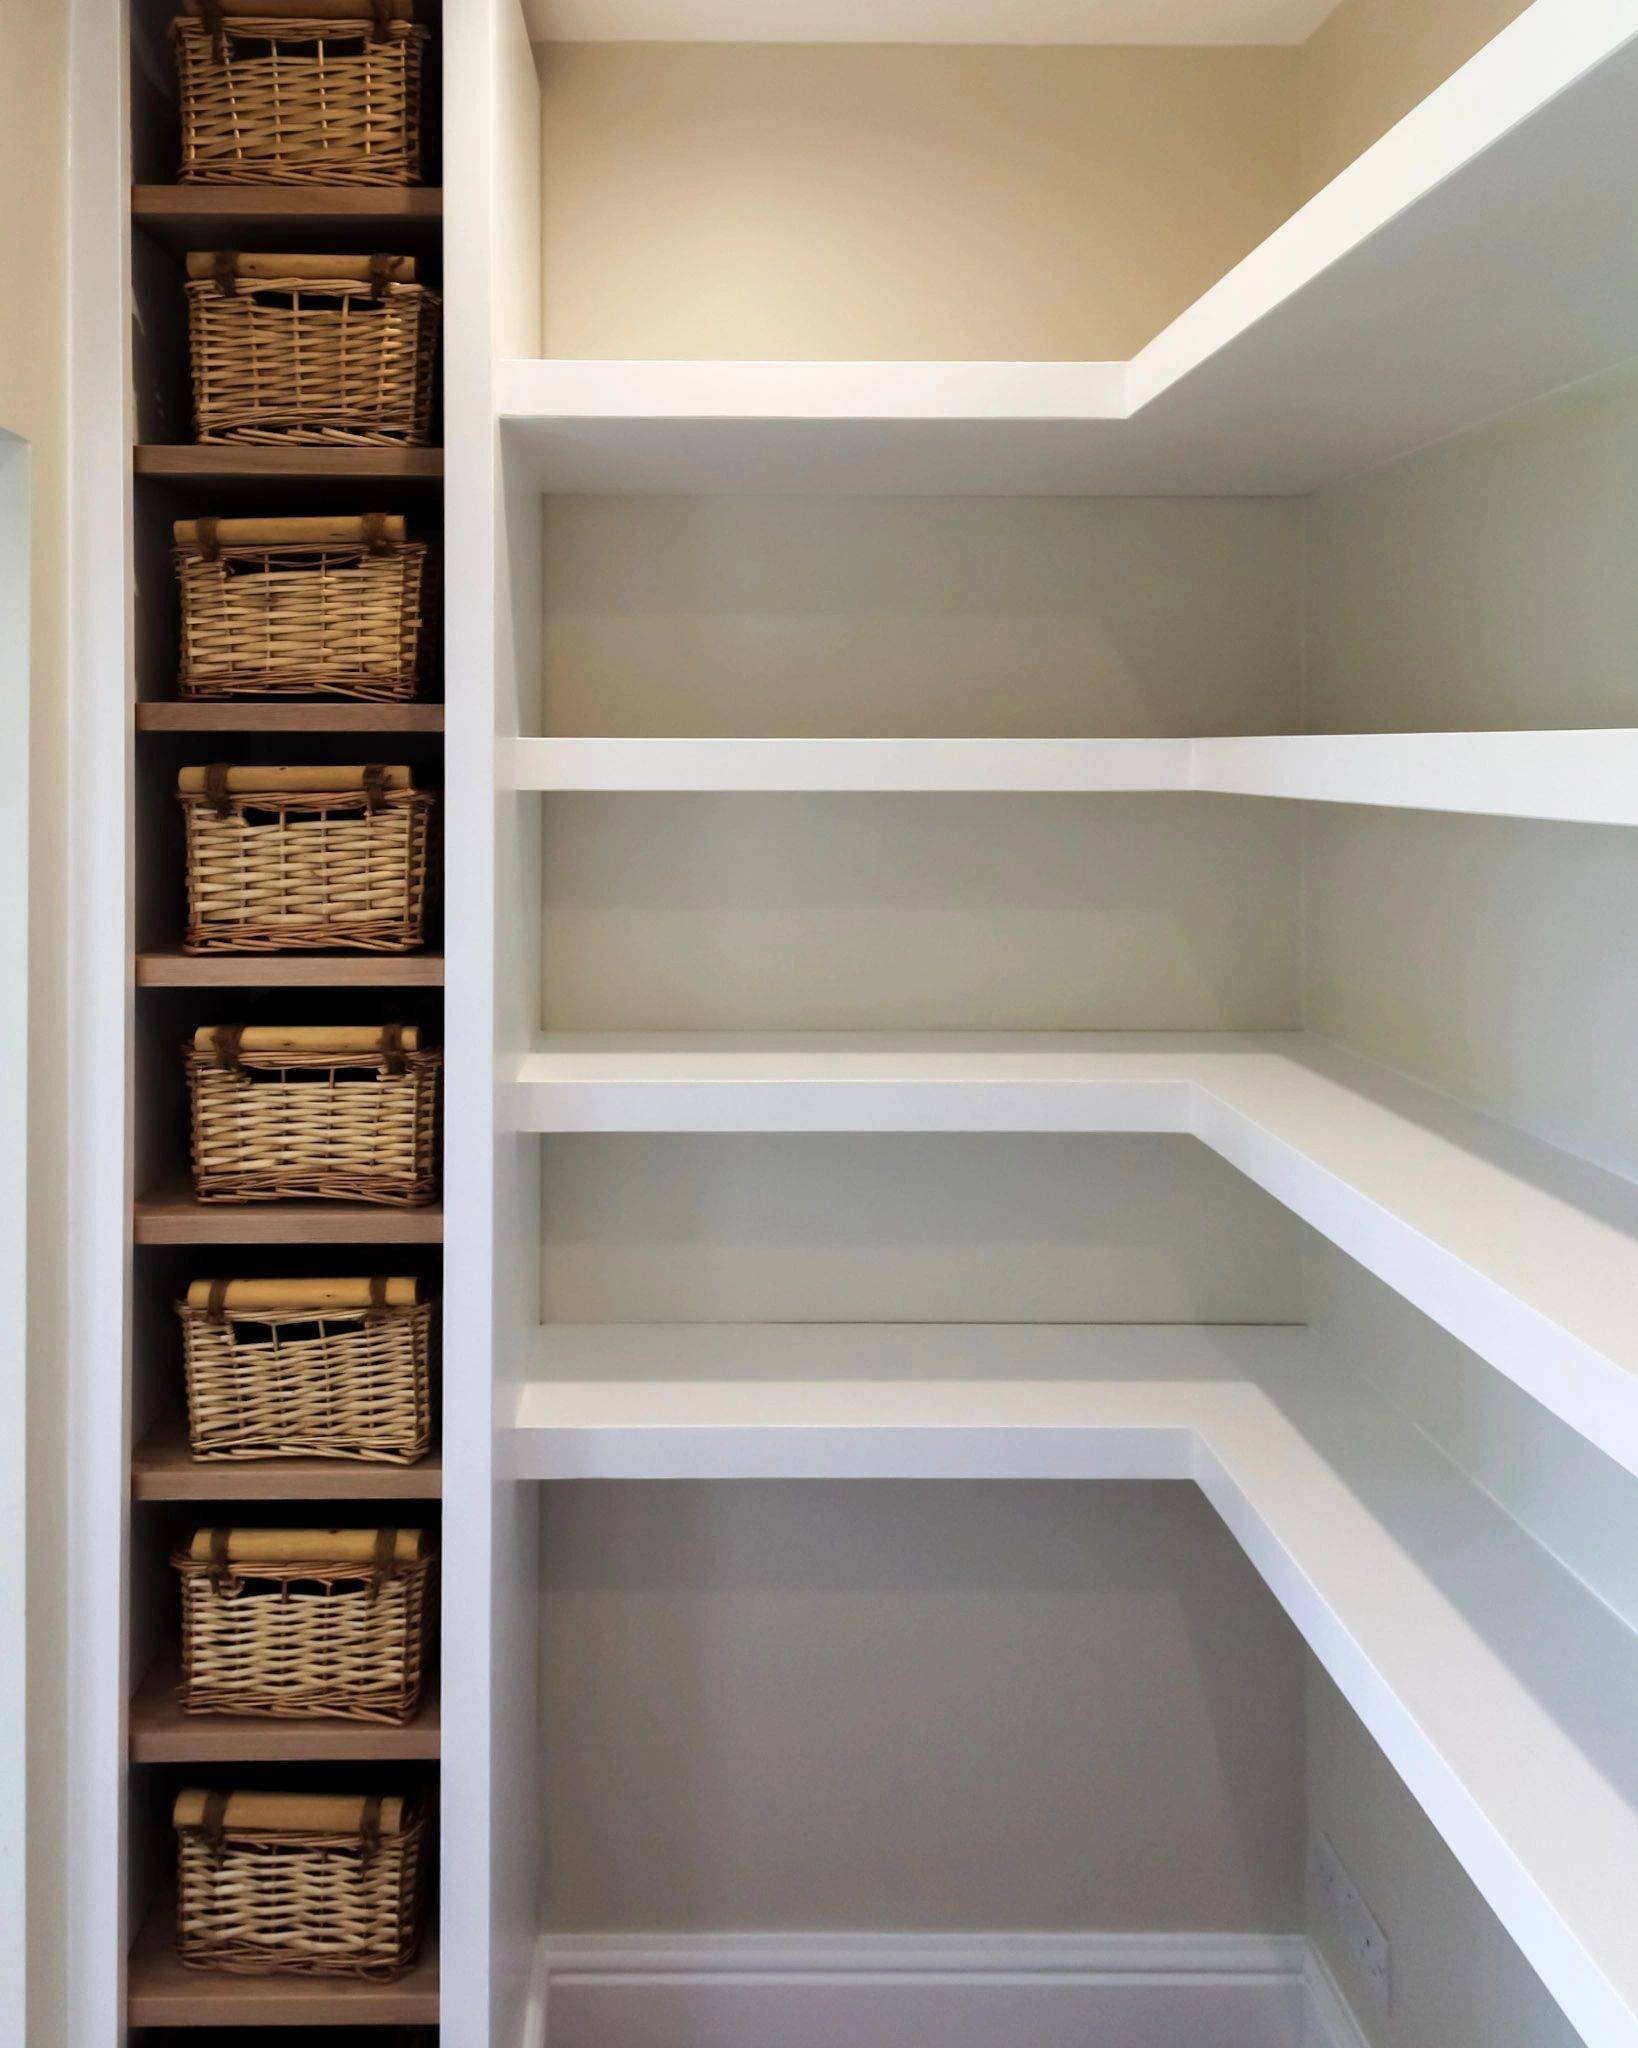 Under Stairs Pantry Shelving Ideas : How To Organize A Small Under